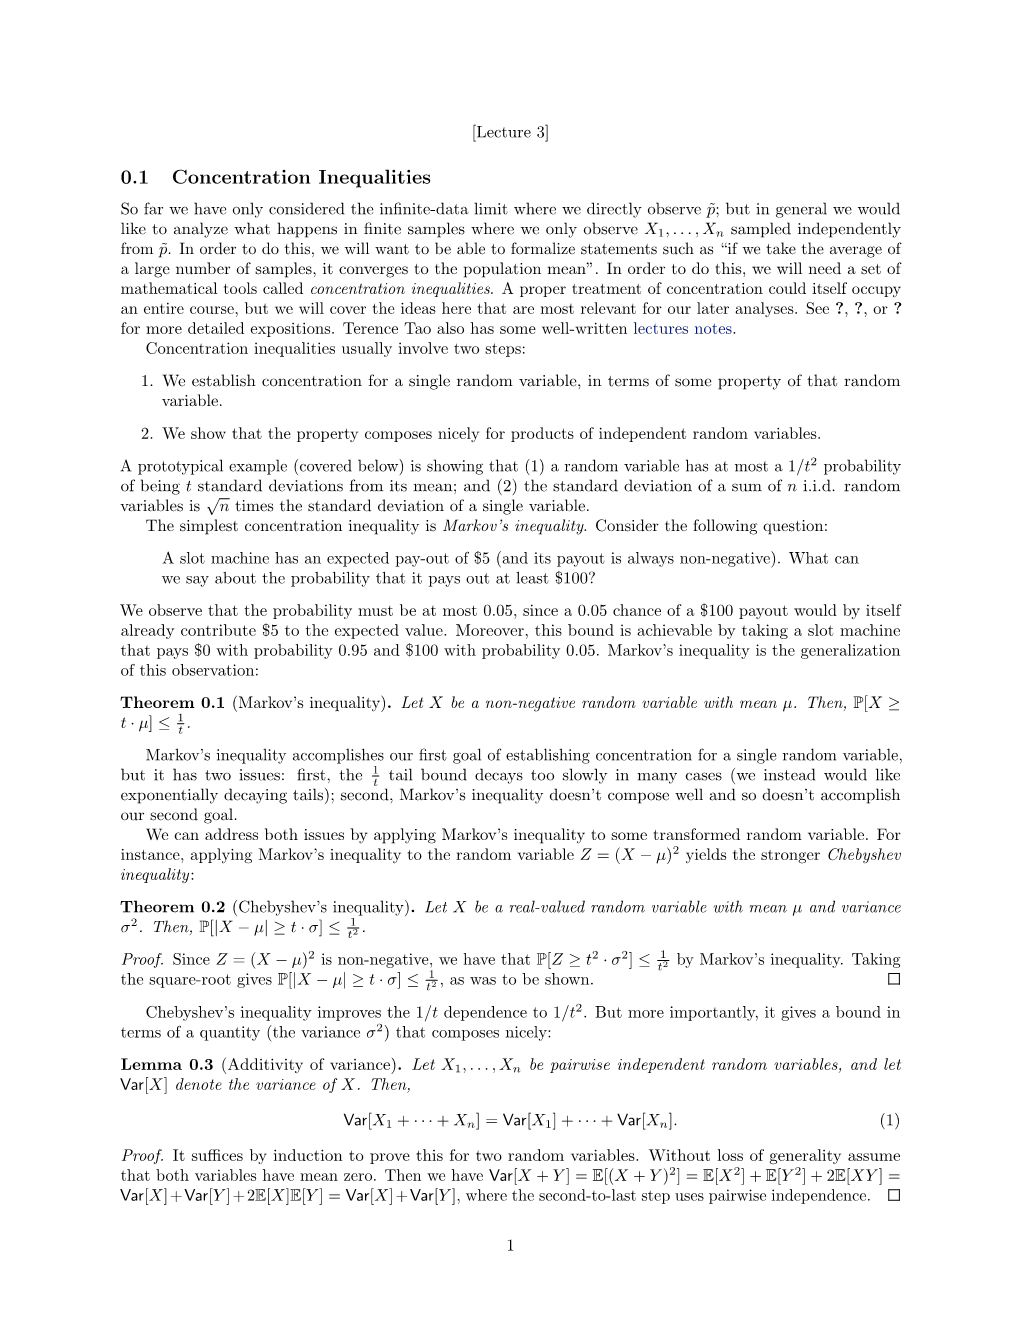 0.1 Concentration Inequalities